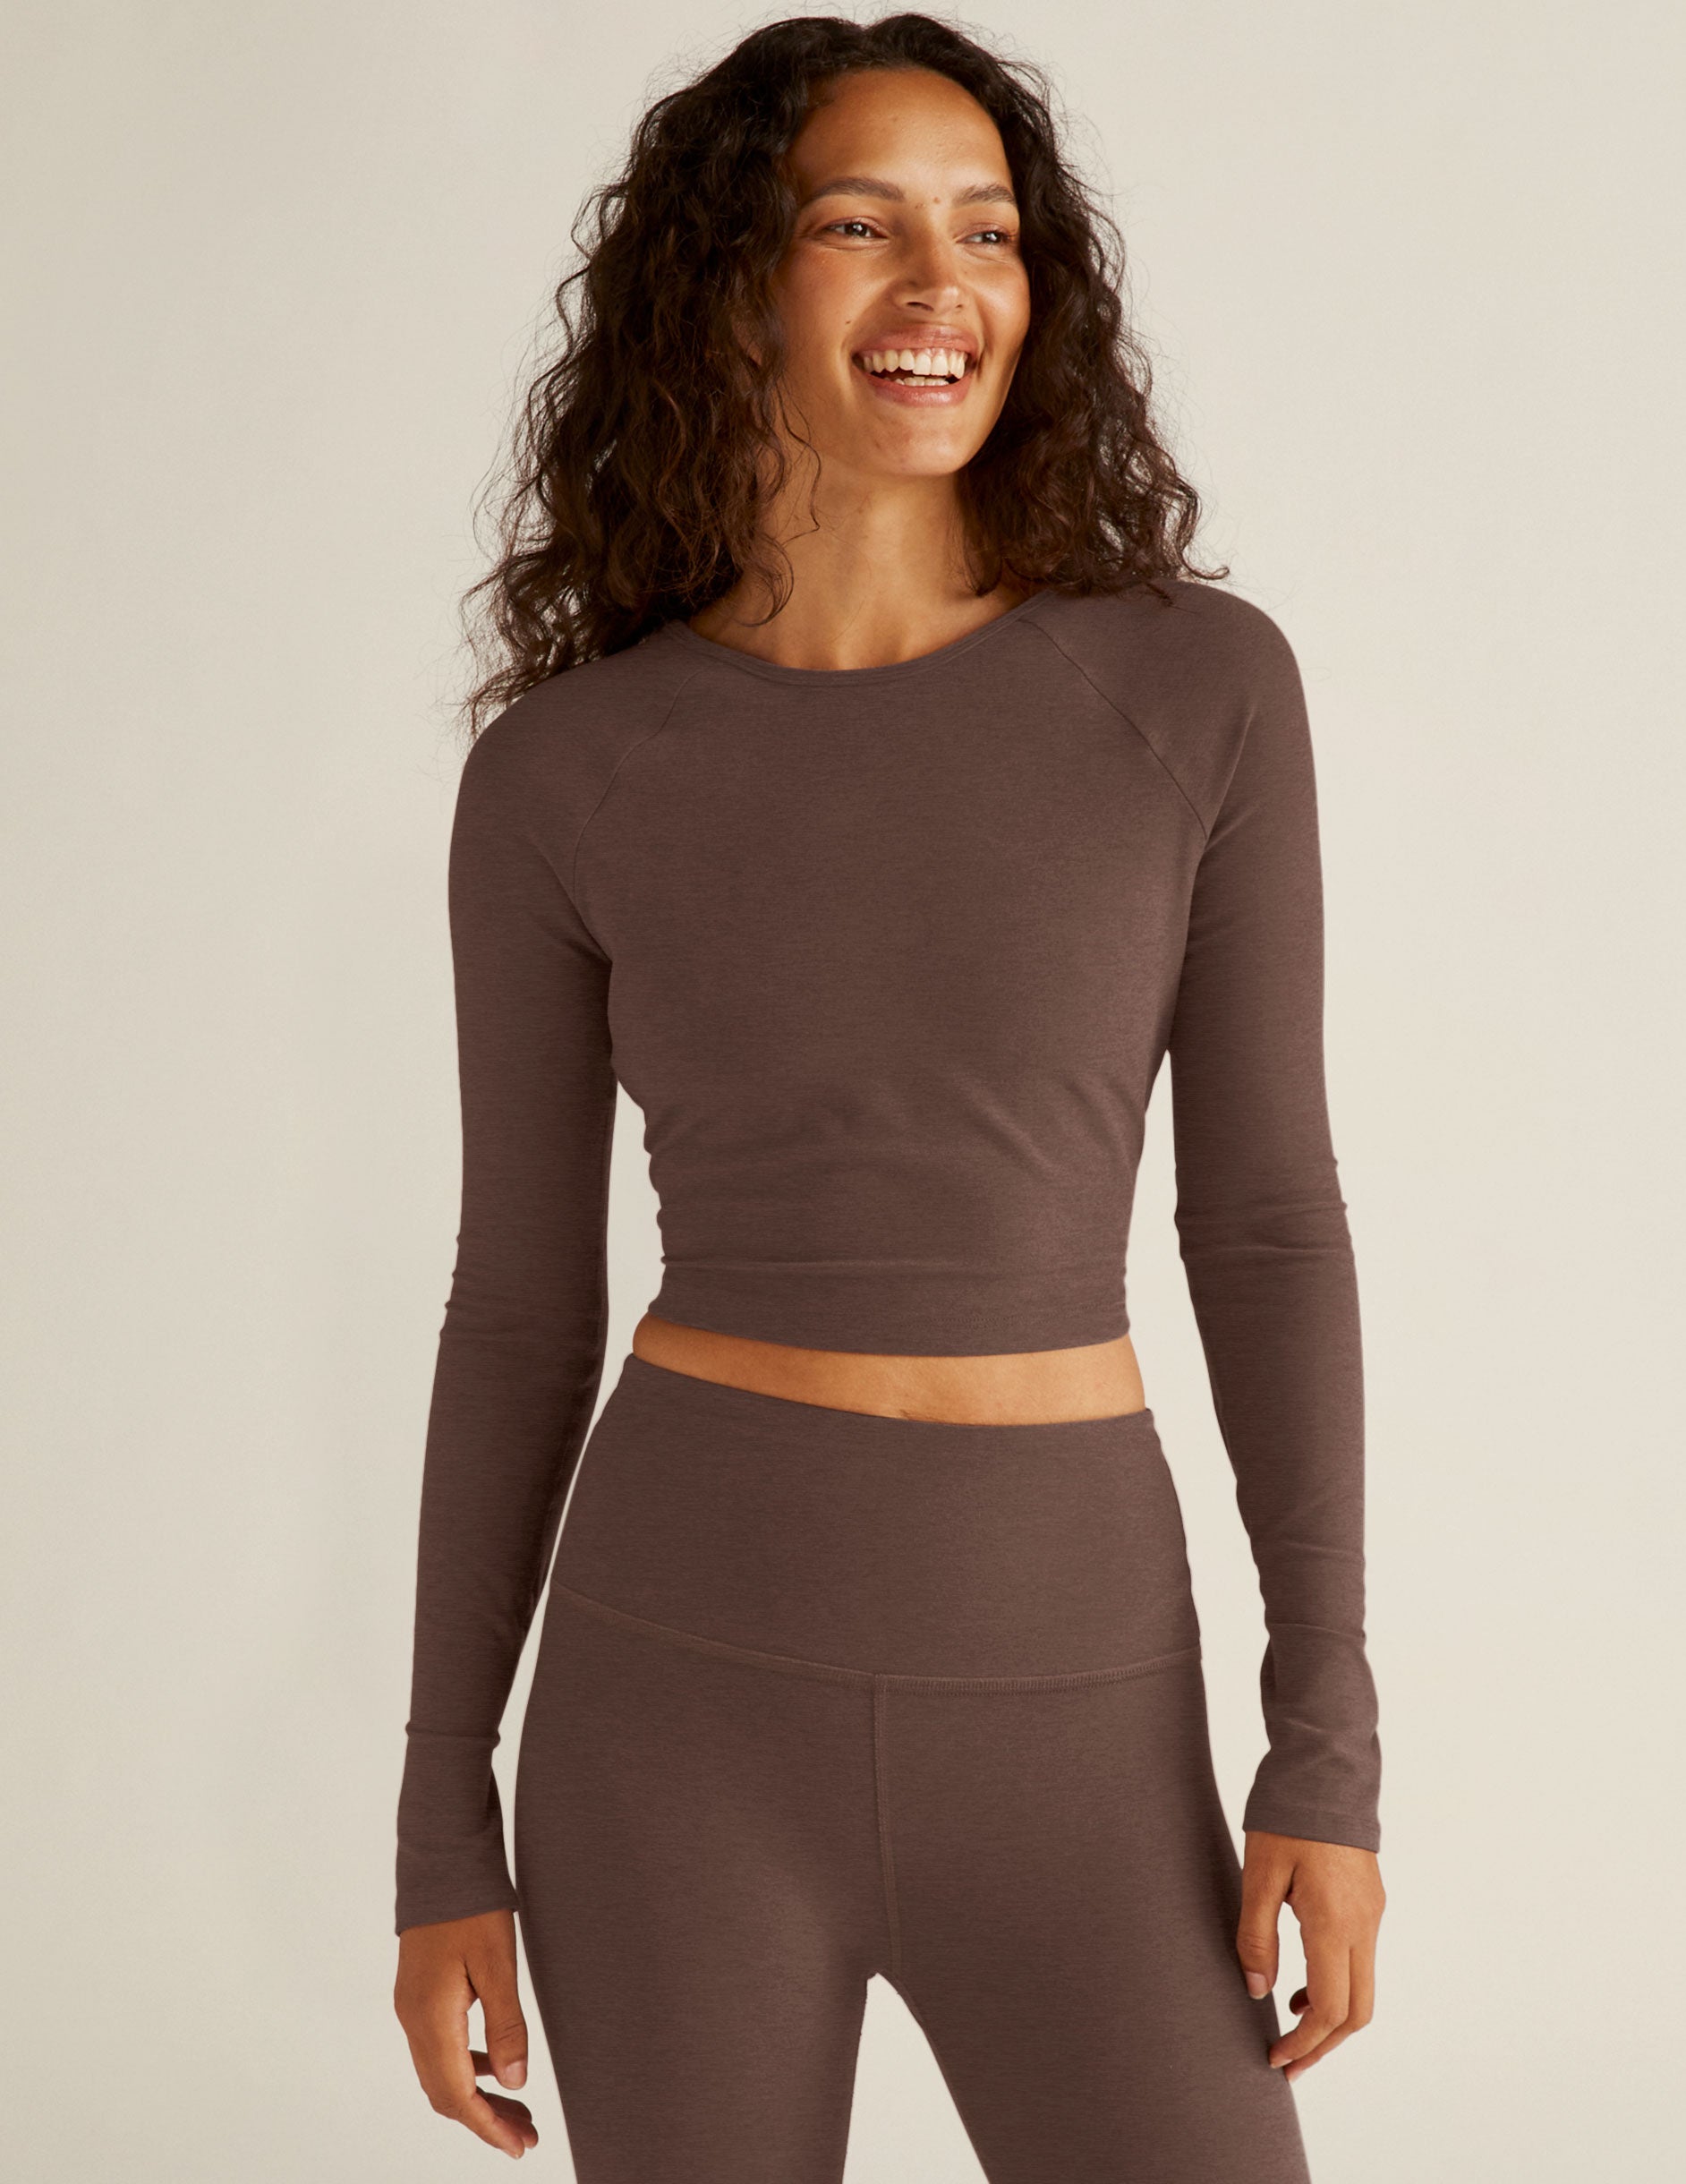 brown long sleeve cropped pullover with an open strappy back detail. 